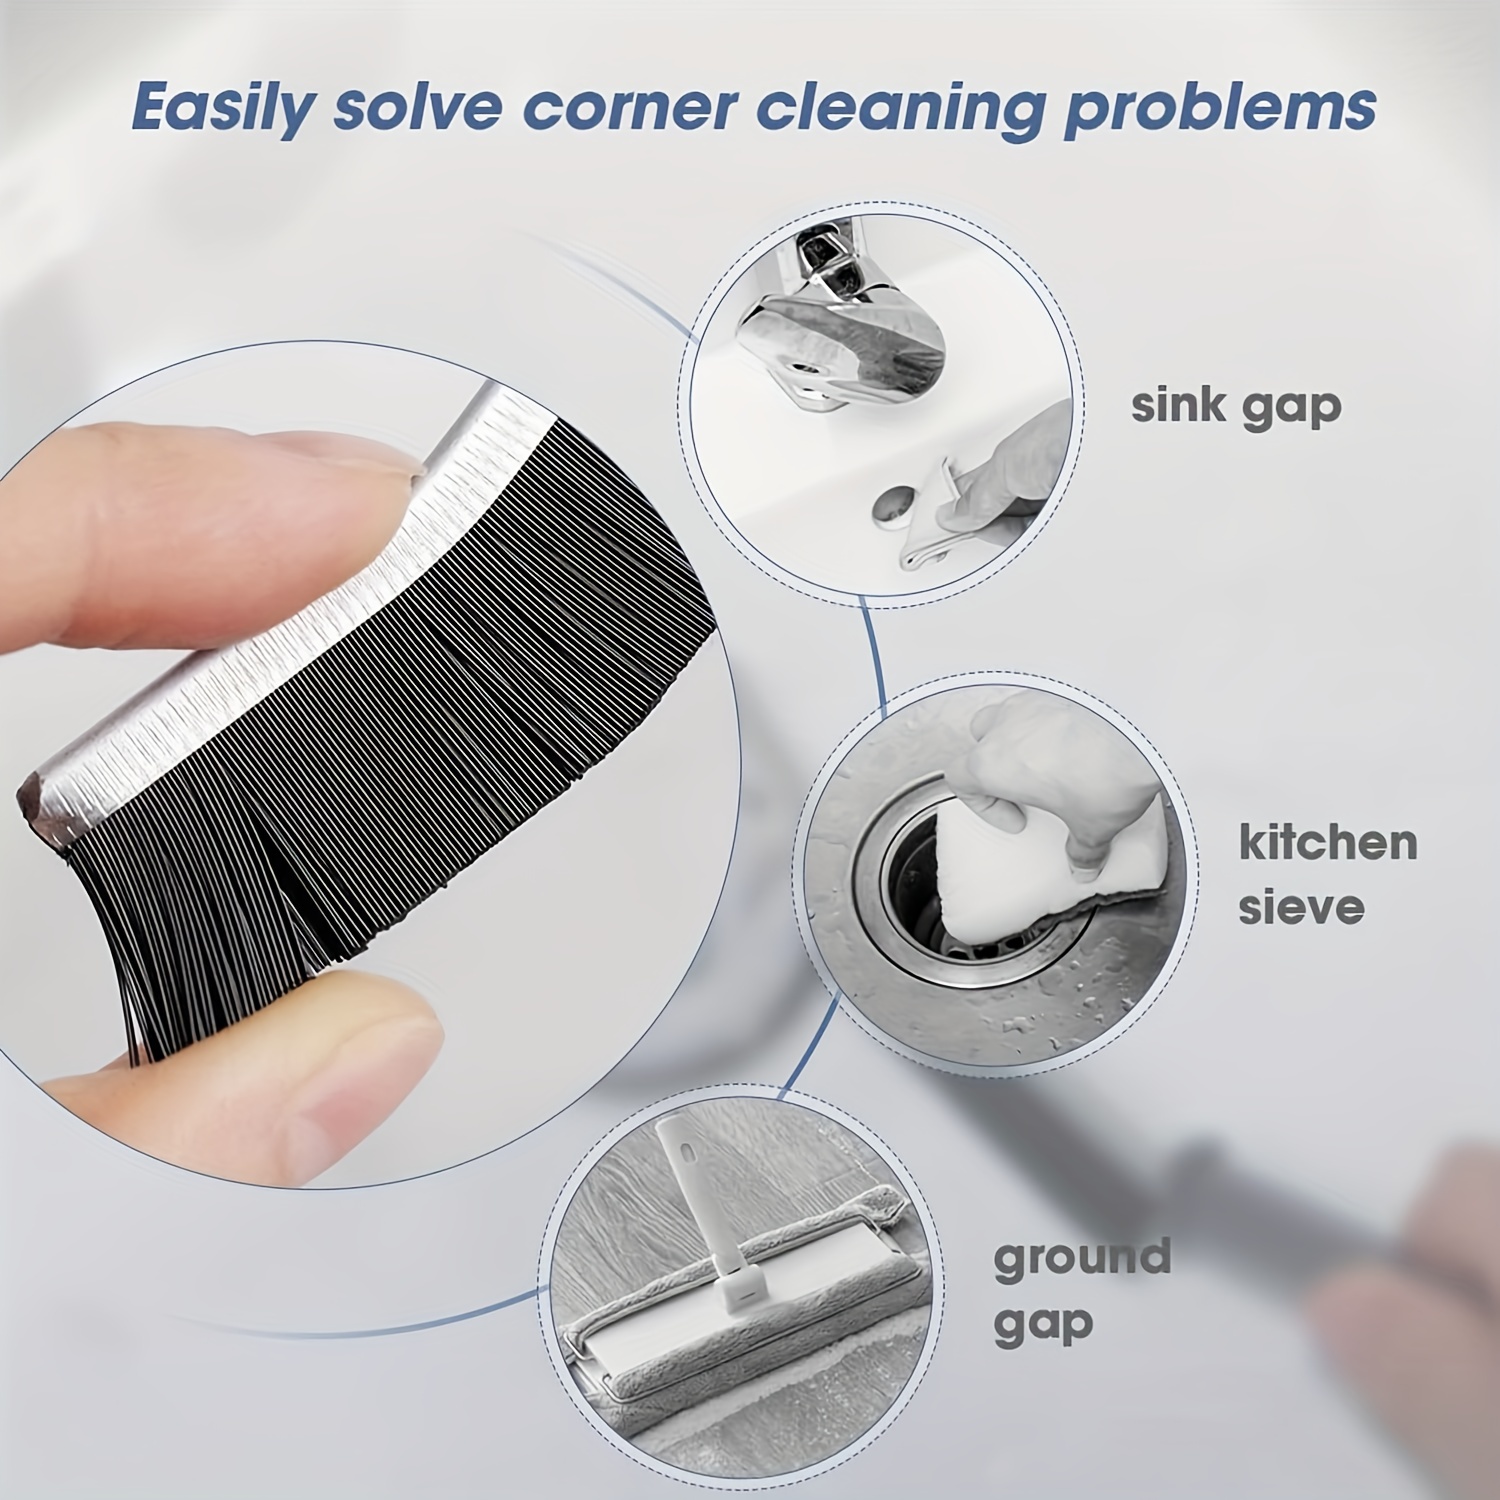 Small Crevice Cleaning Brushes for Small Spaces,3-in-1 Crevice